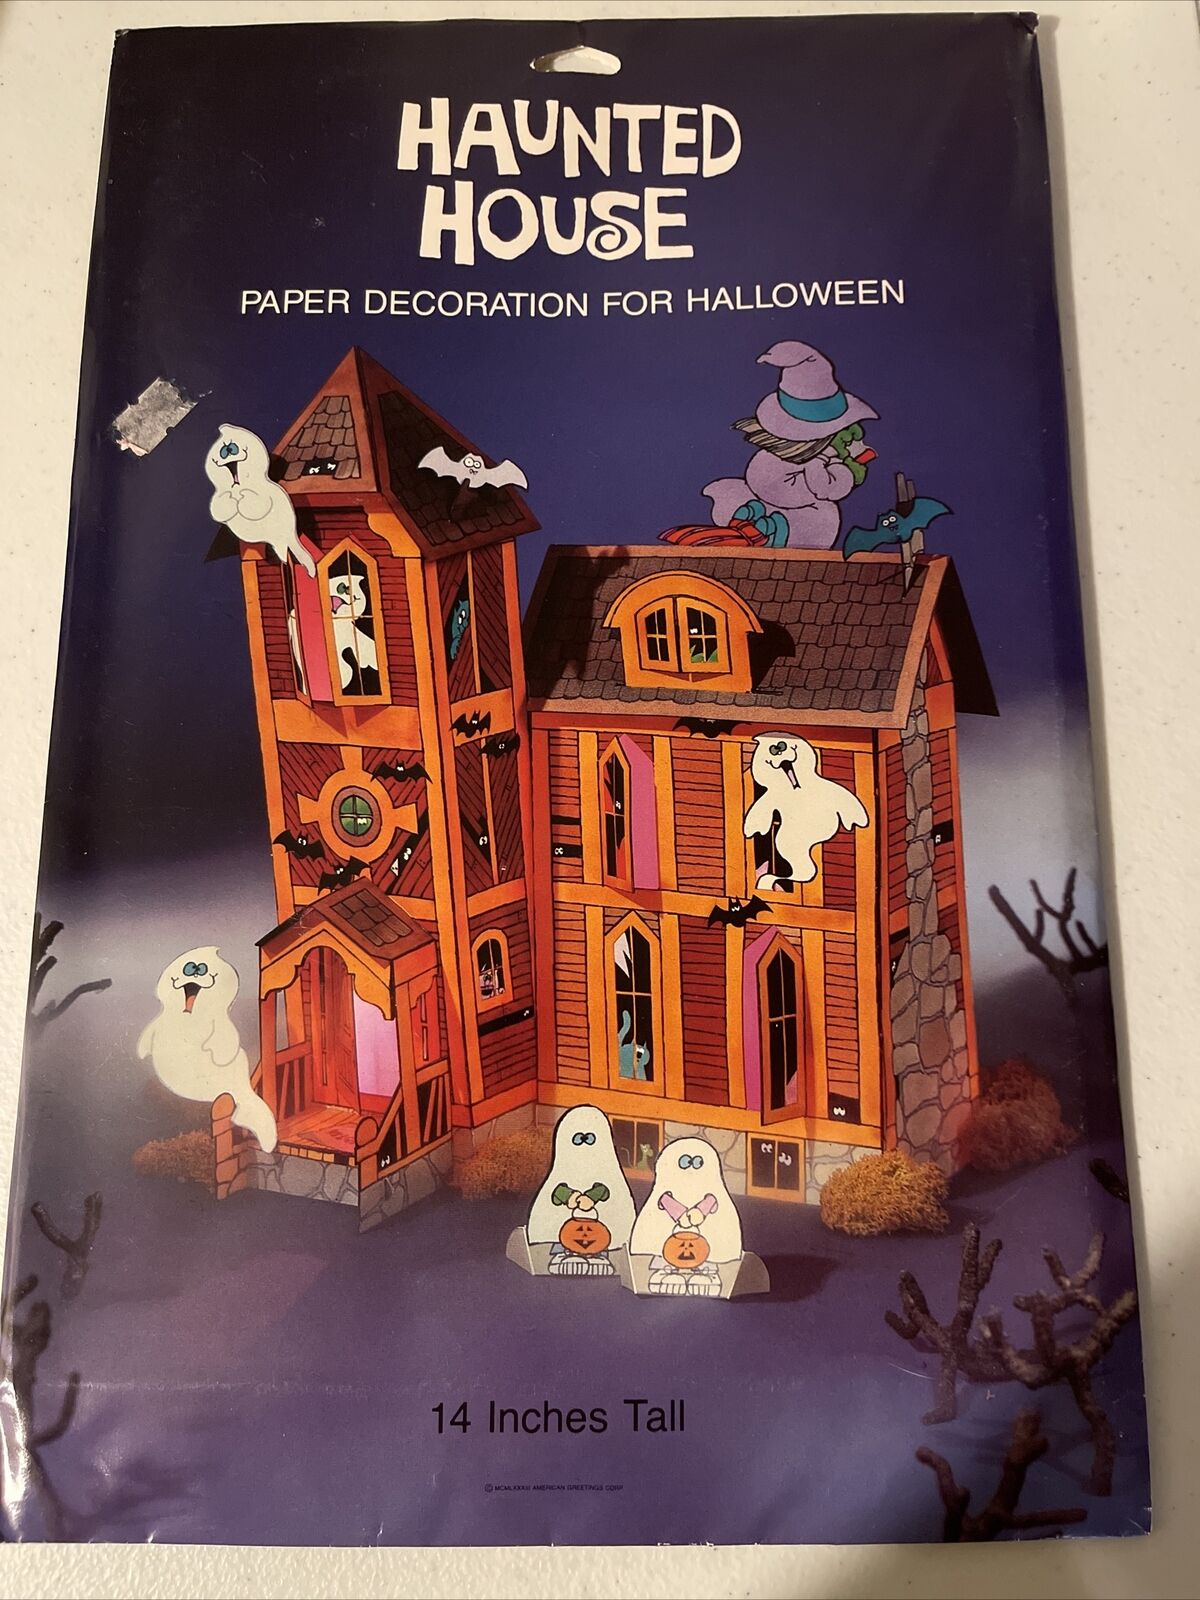 Vintage Halloween American Greetings Haunted House Paper Decoration 14” Tall NEW